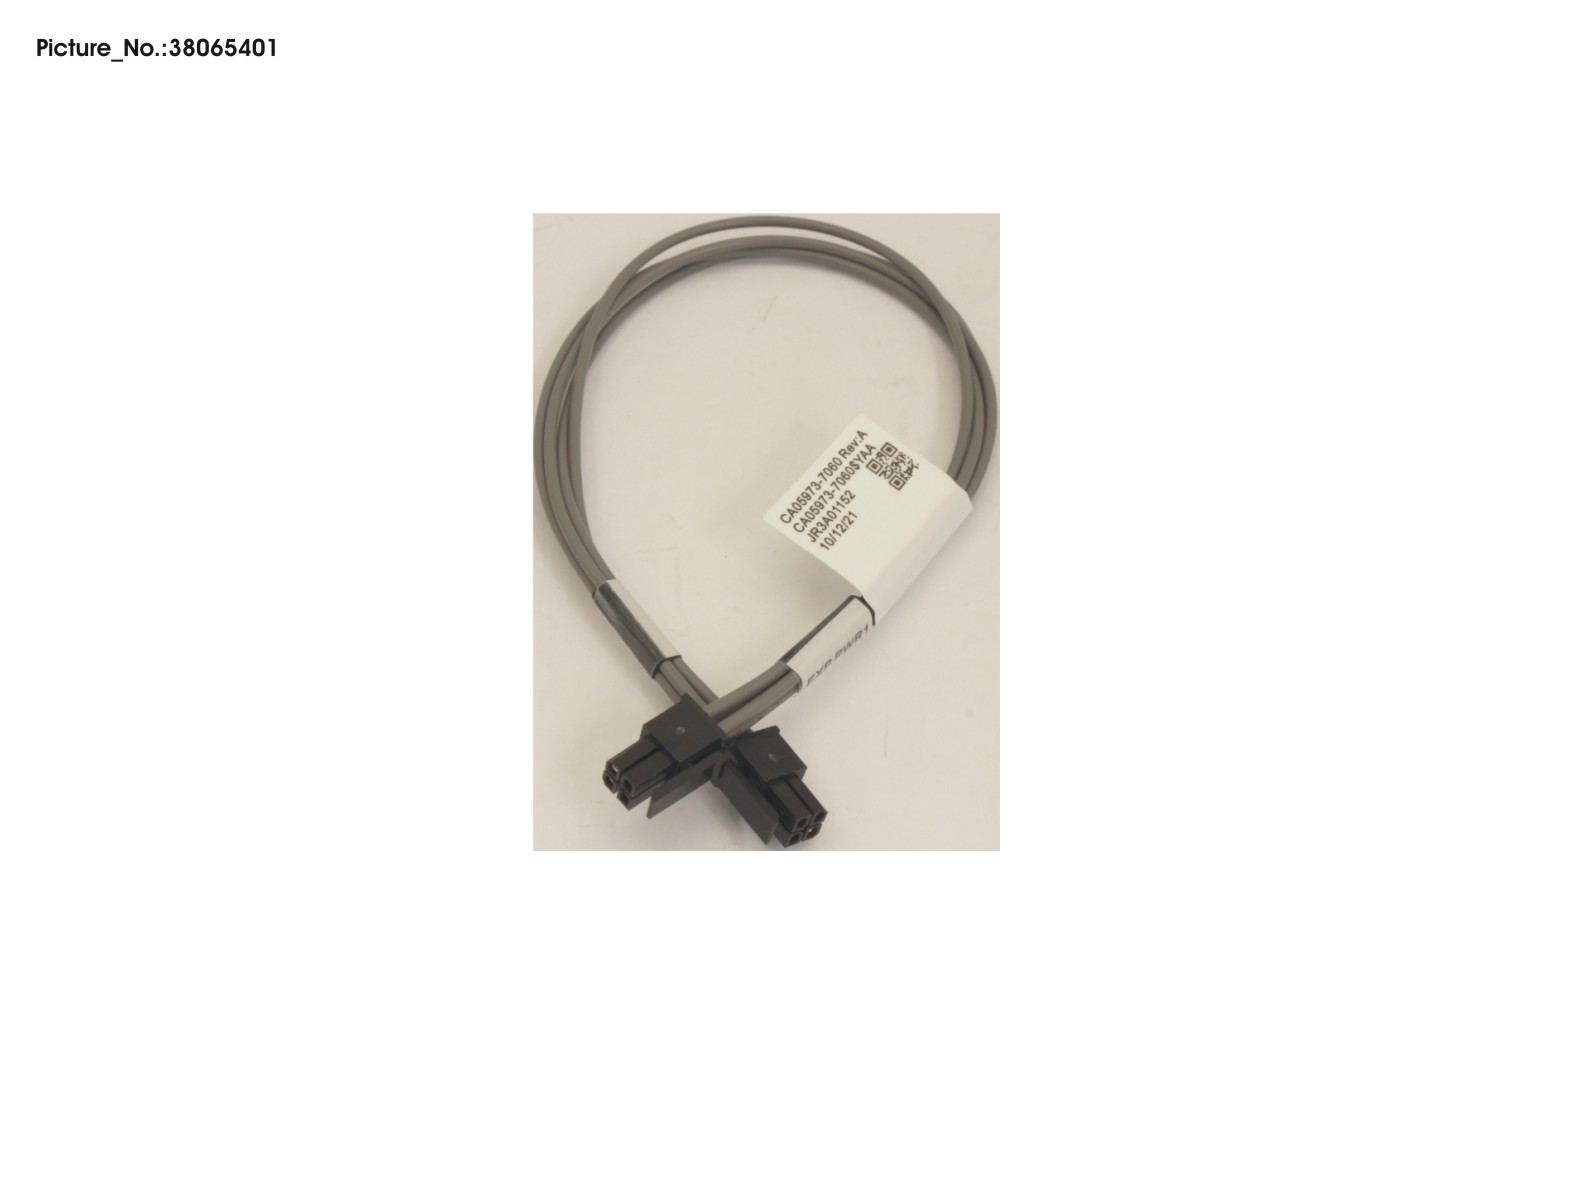 EXPANDER PWR CABLE